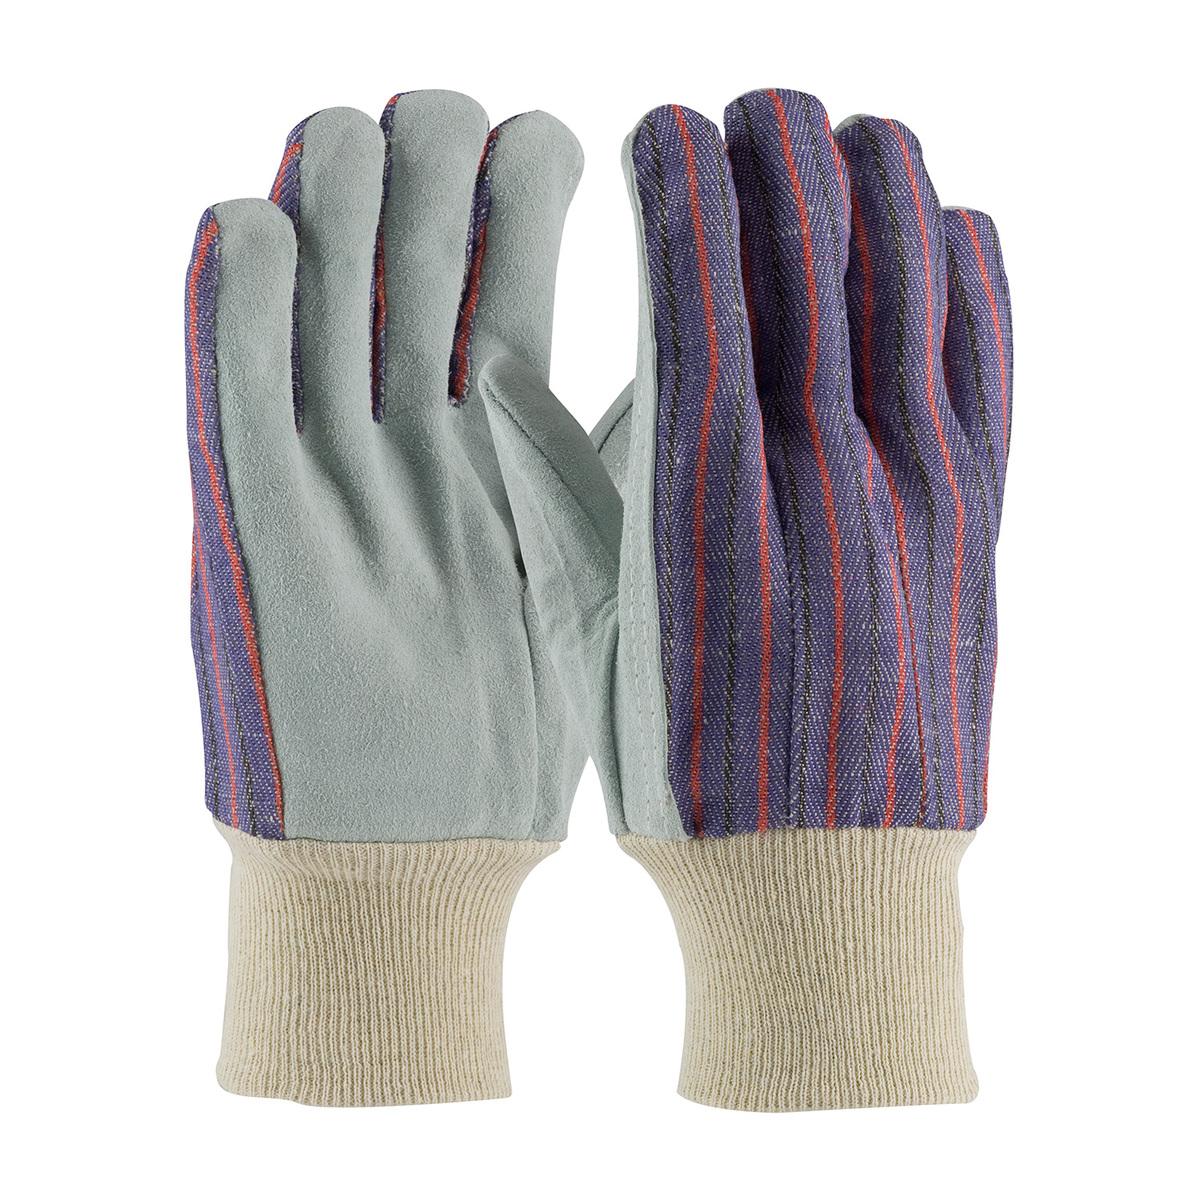 PIP® Men's Economy Leather Palm Gloves With Canvas Back And Knit Wrist